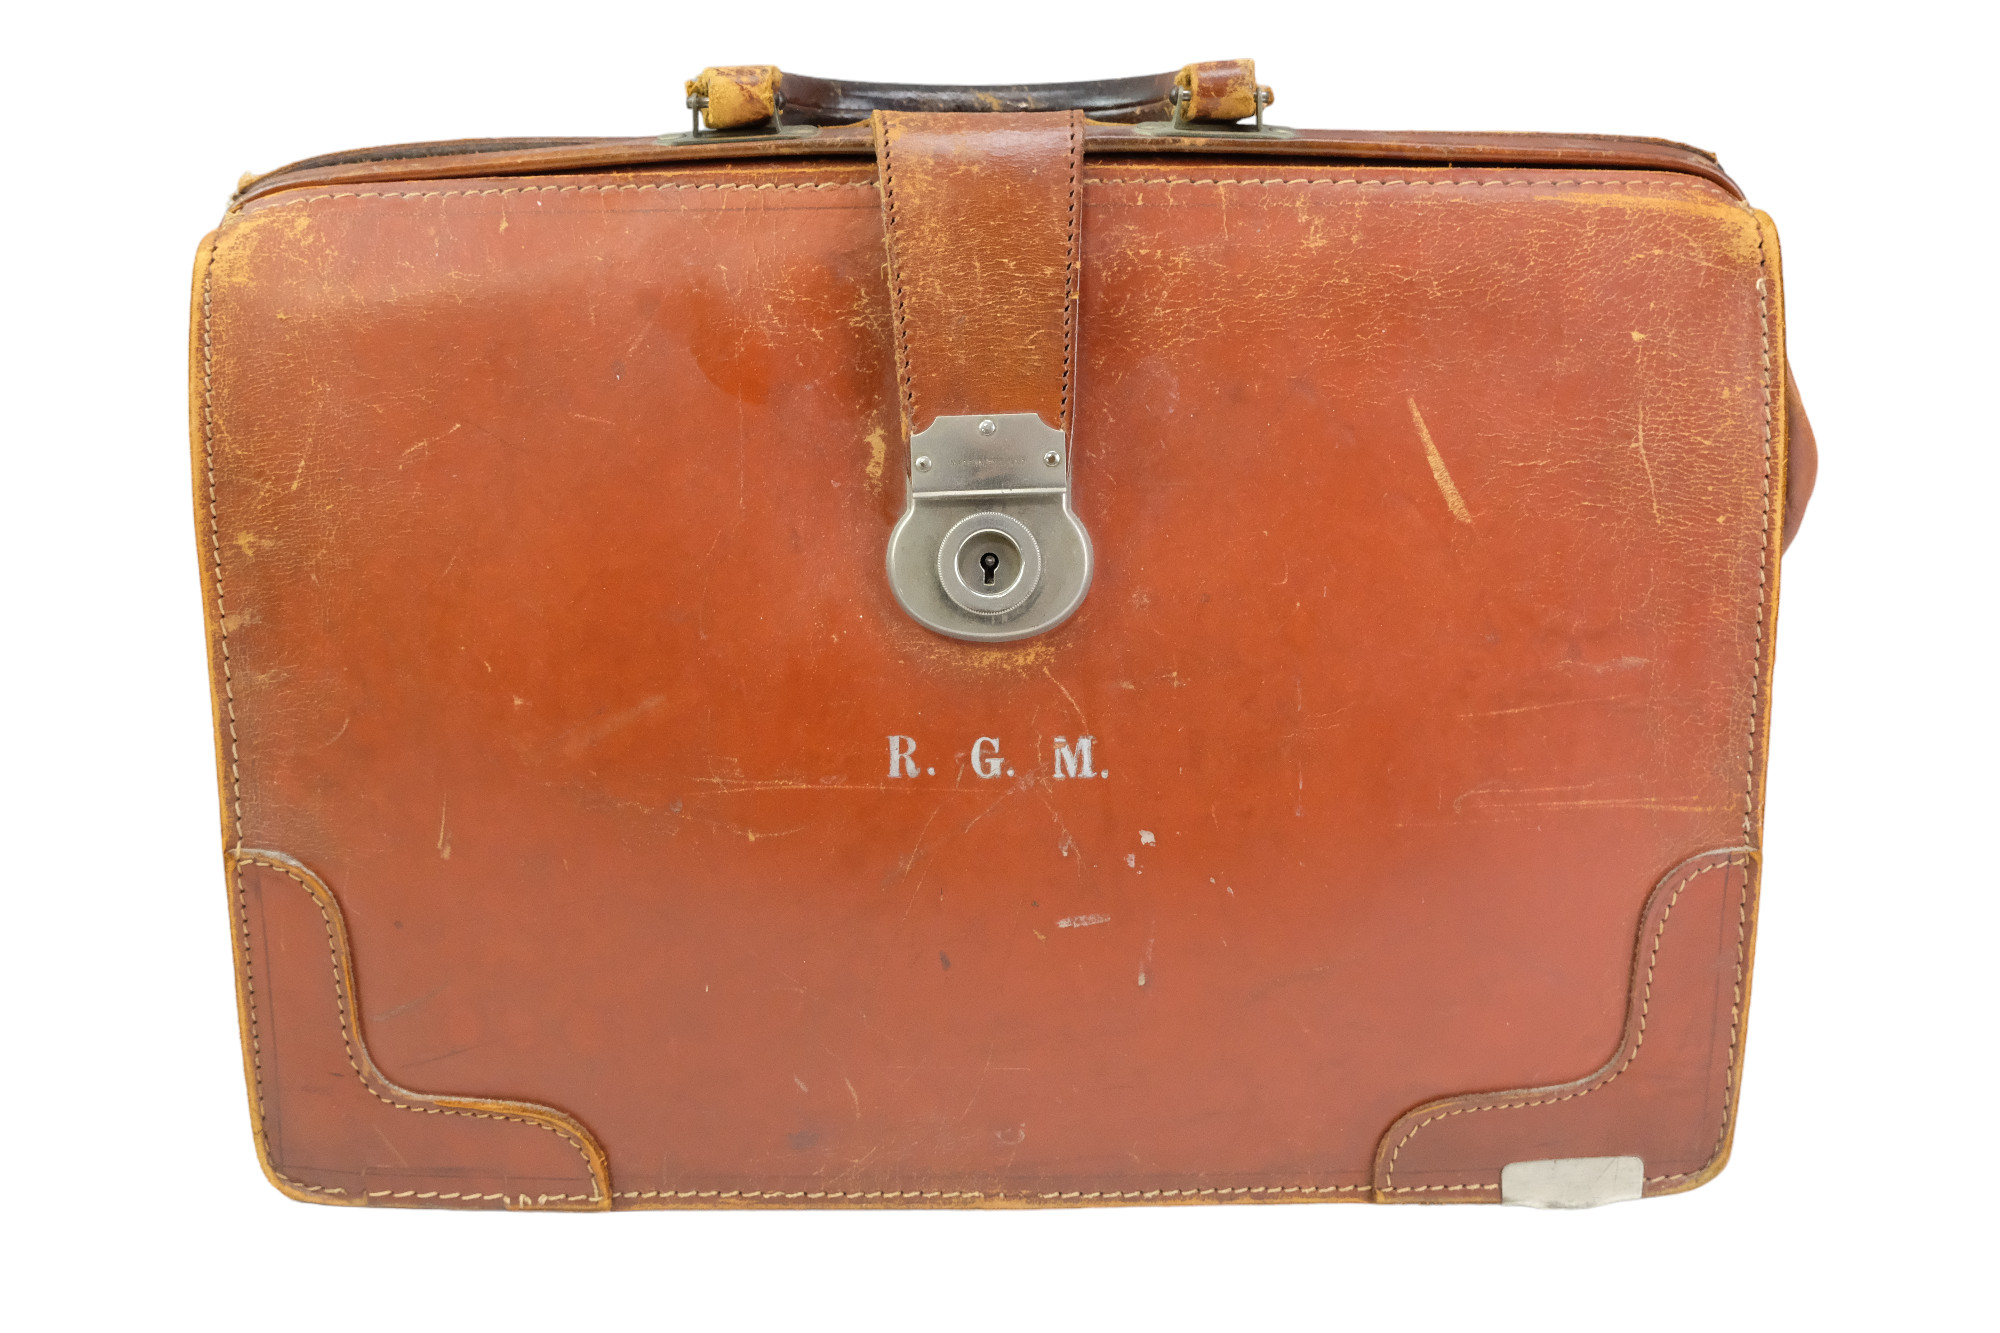 Three vintage leather bags / satchels, early-to-mid 20th Century, largest 43 x 28 x 15 cm - Image 4 of 4